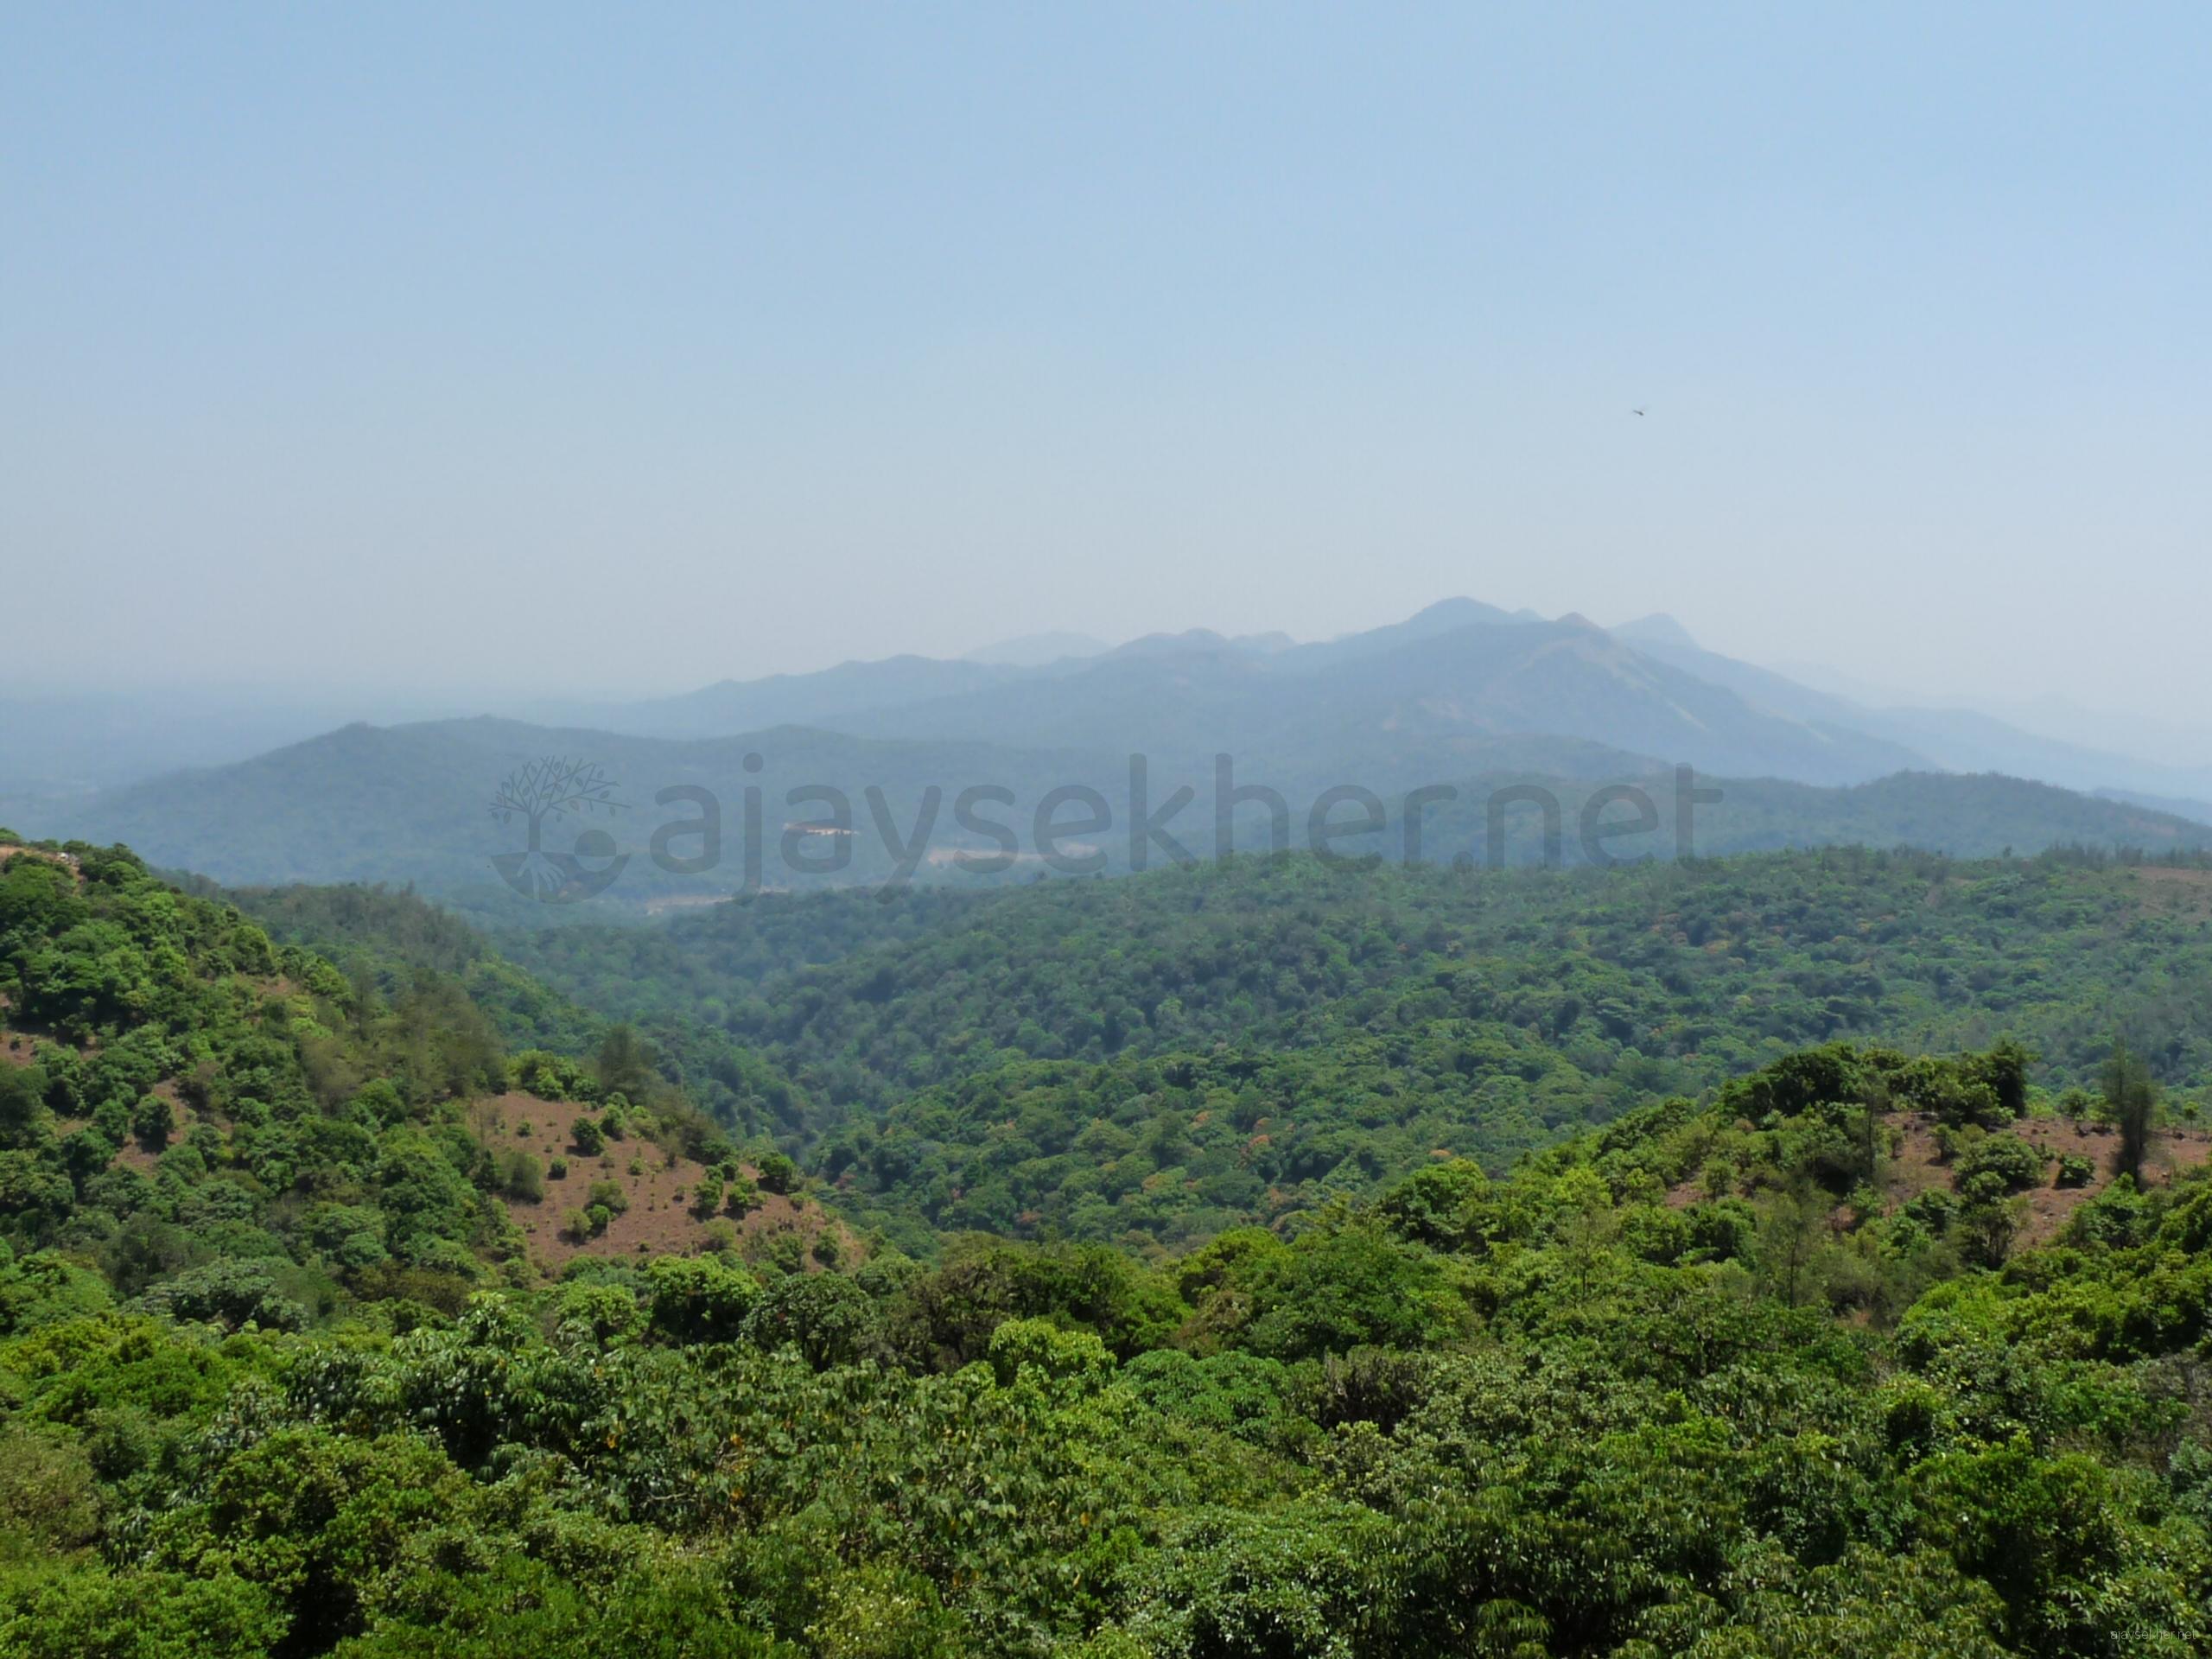 A panoramic view of Kodagu peaks and forests from Talakavery zenith